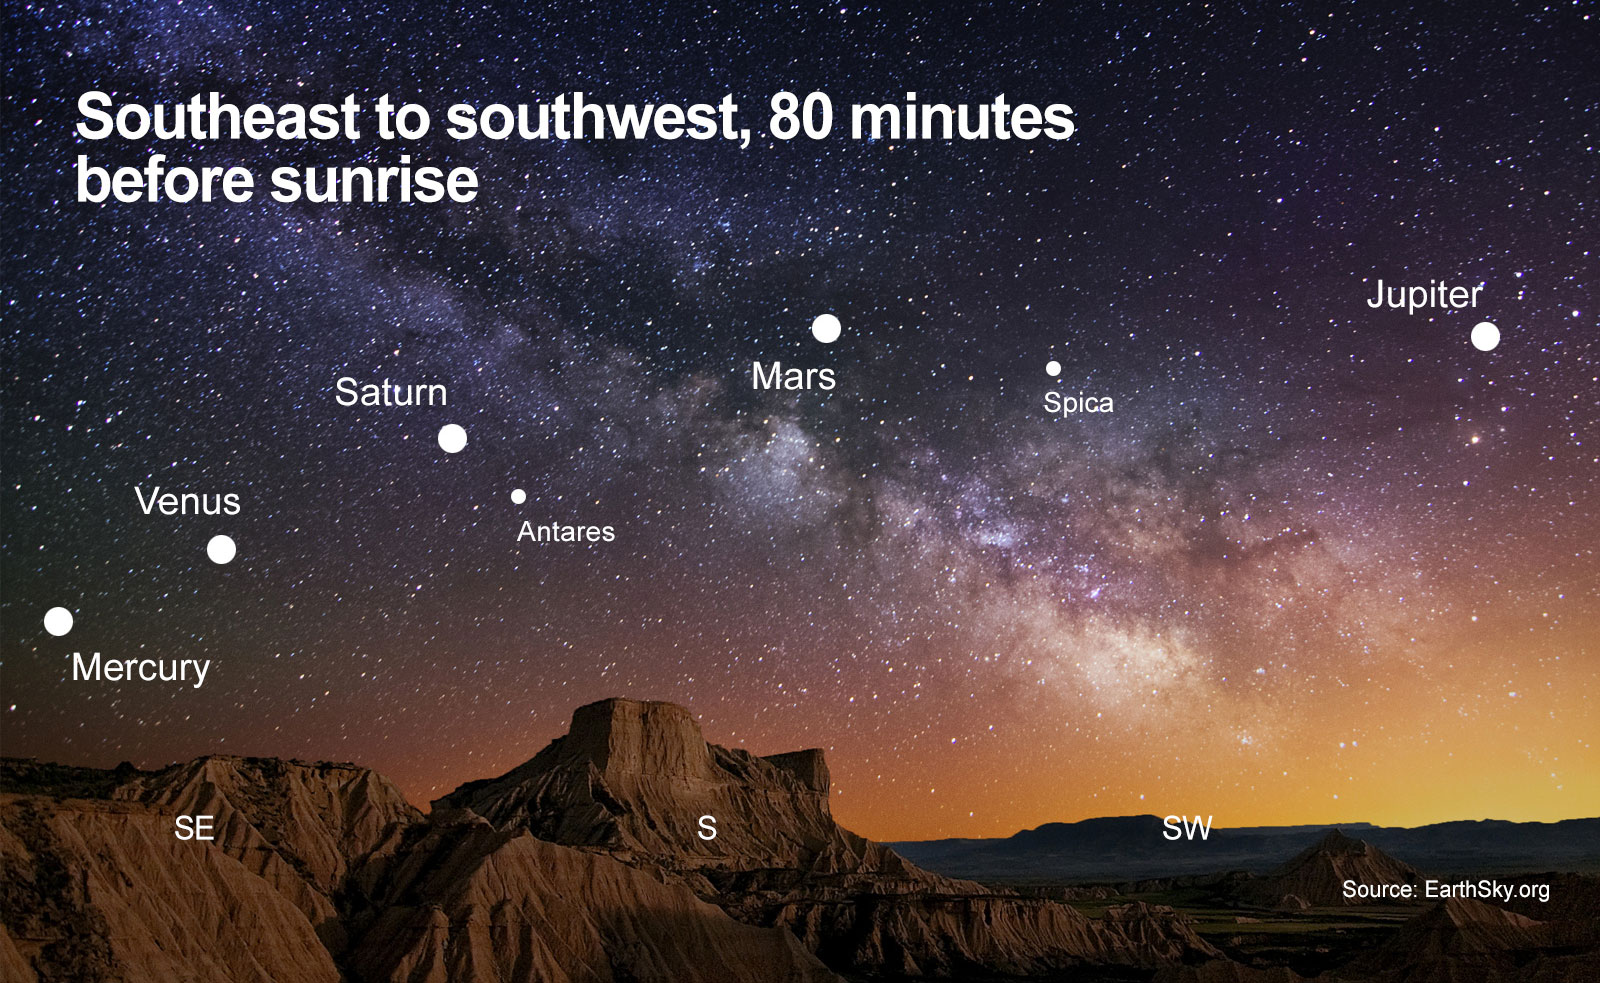 A diagram shows the five planets that will be visible before sunrise.